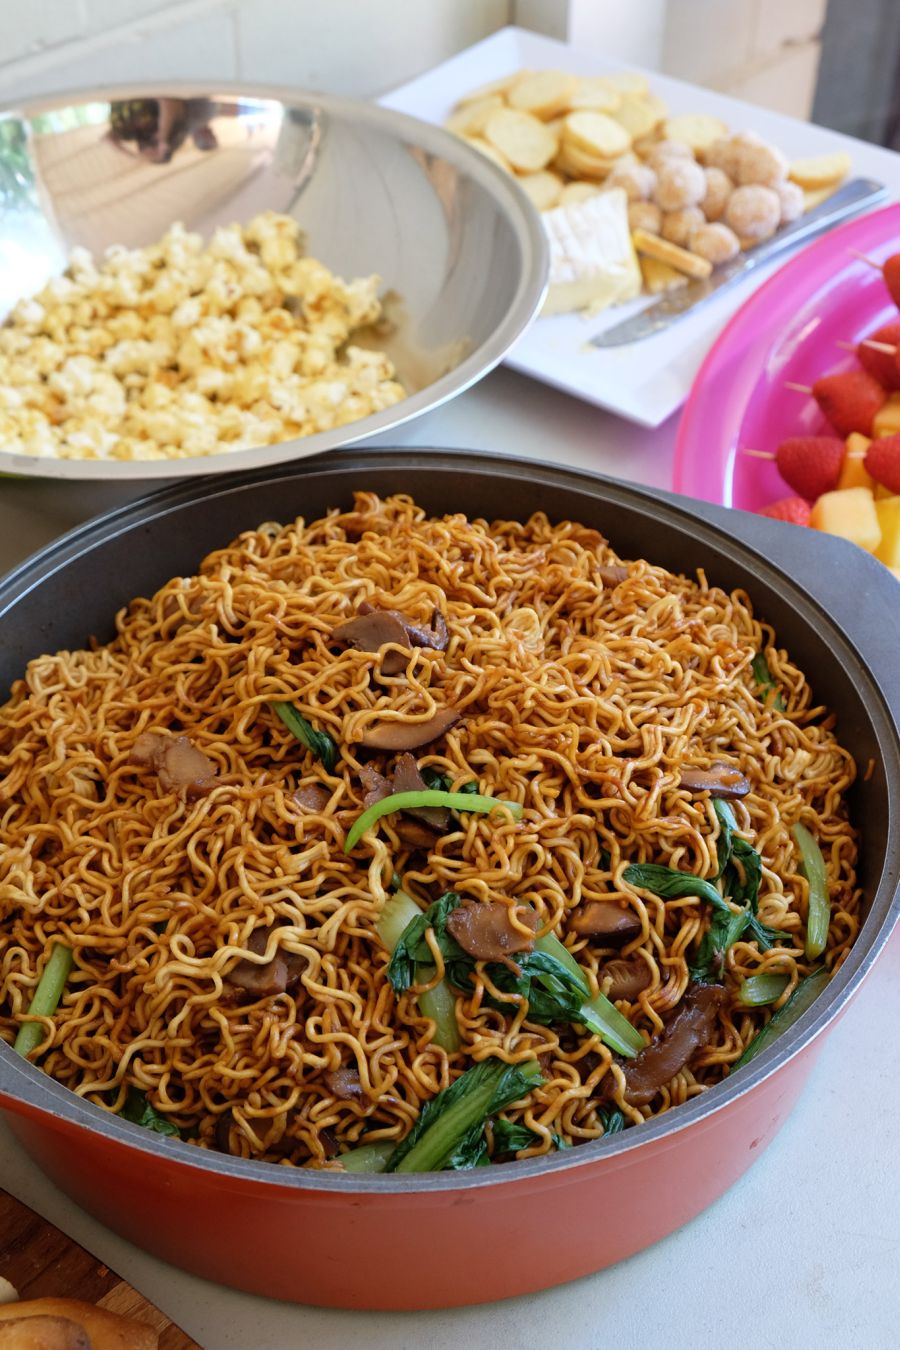 My mum's fried noodles for lunch